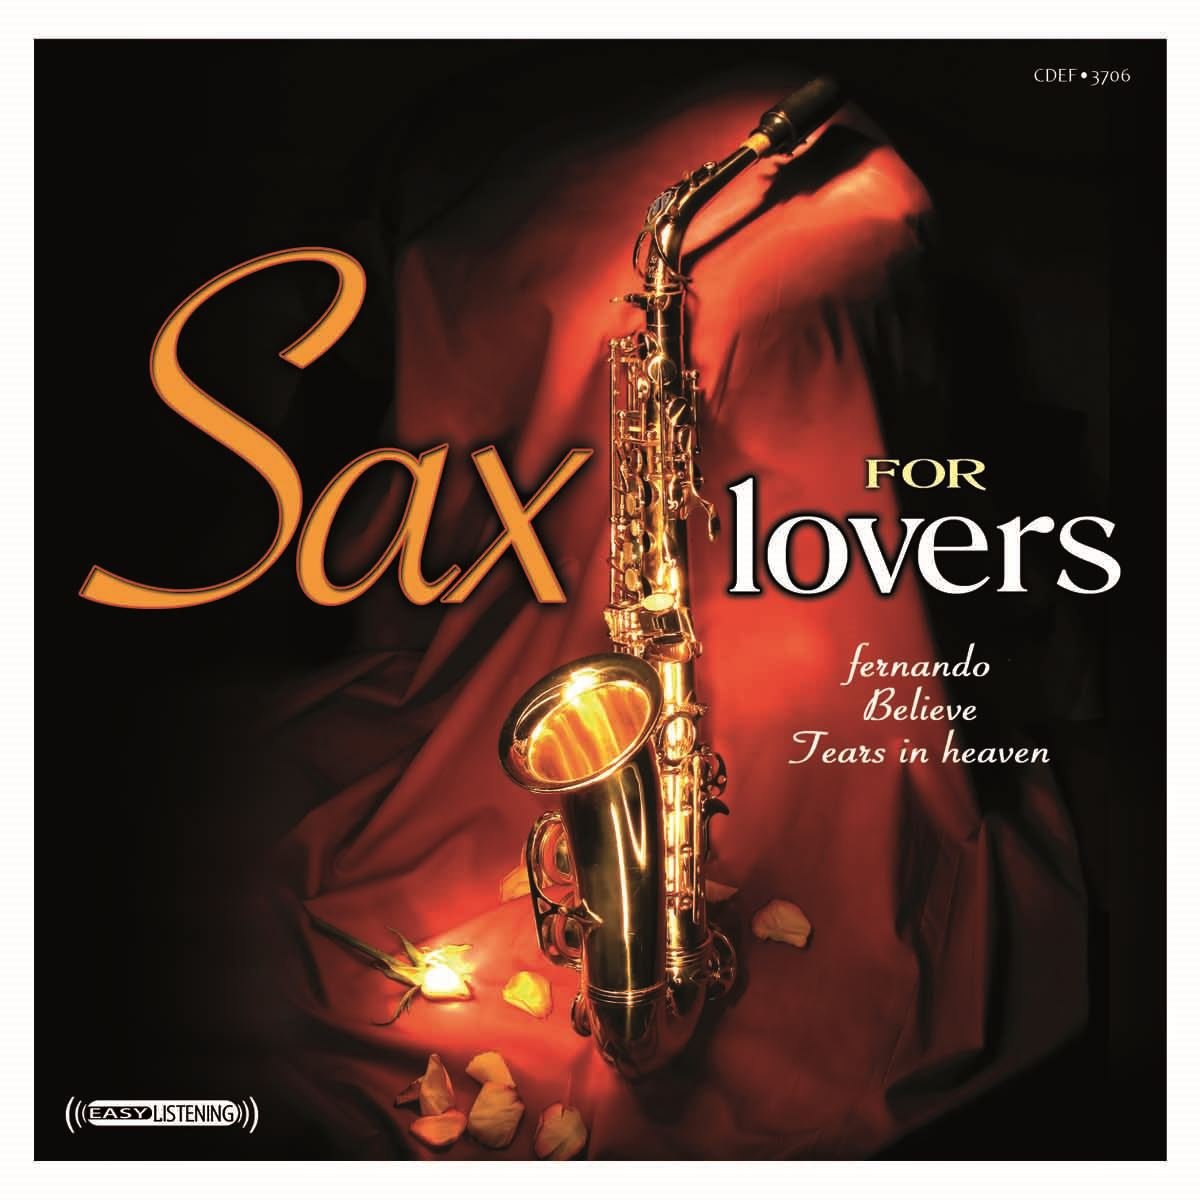 CD Sax For Lovers